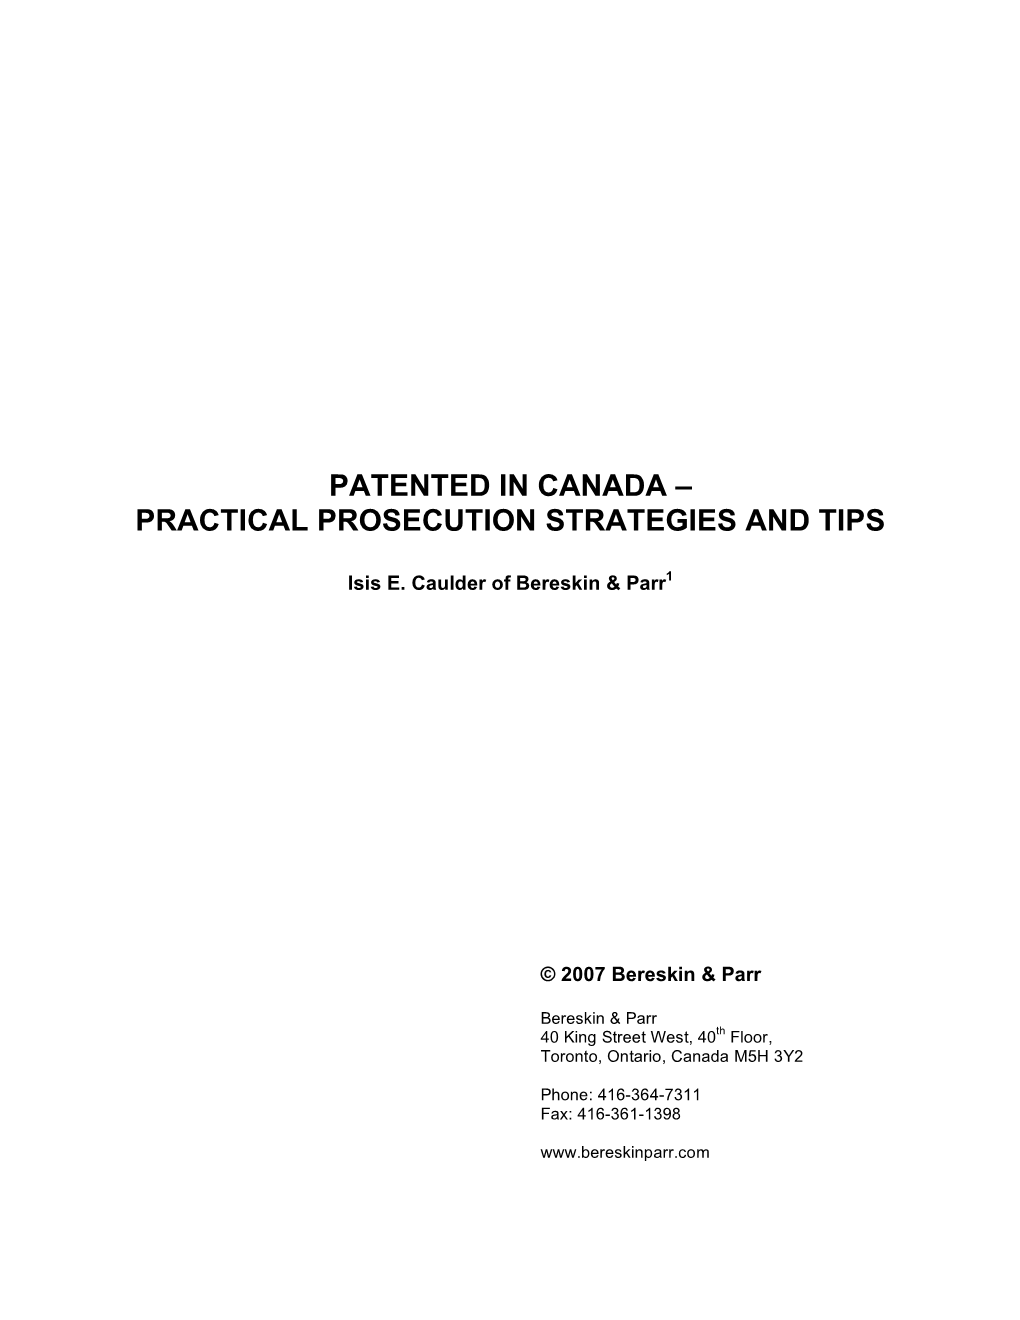 Patented in Canada – Practical Prosecution Strategies and Tips